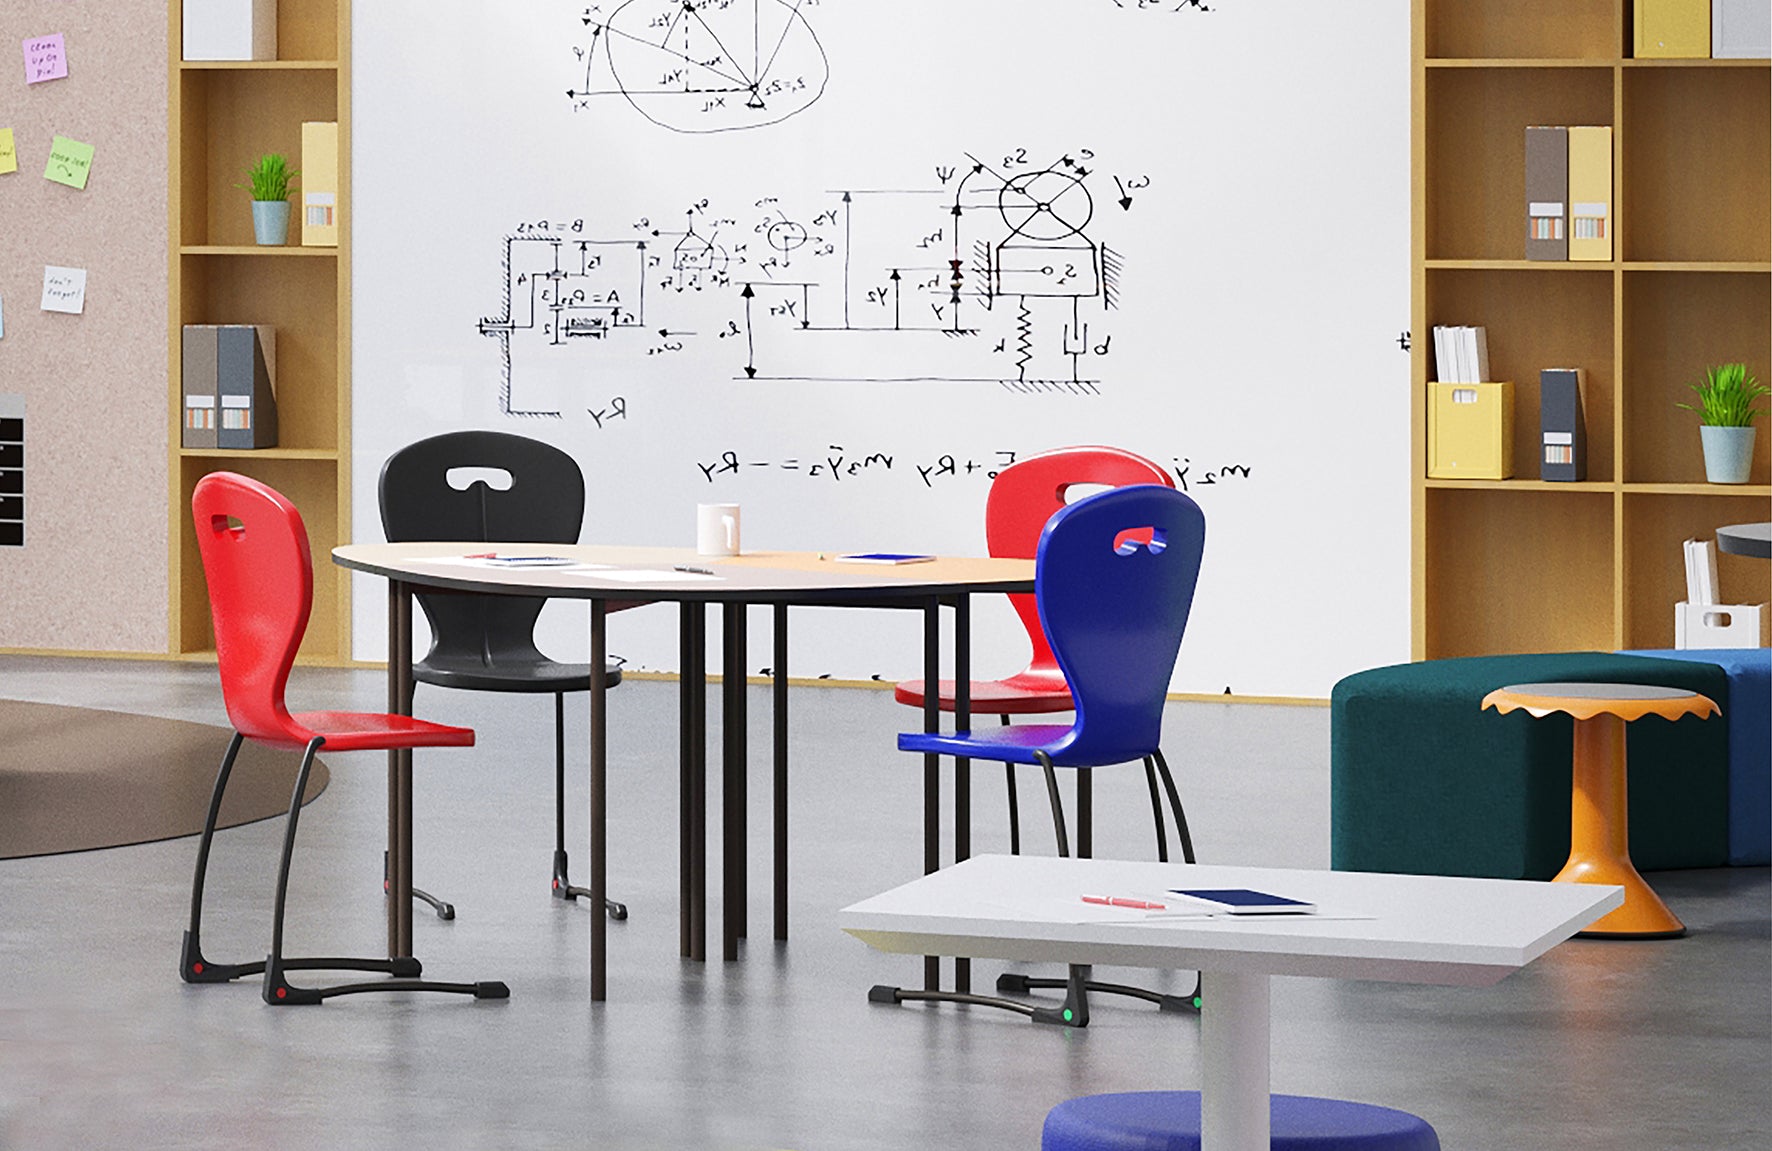 Brighten your classroom with these pieces of flexible classroom furniture